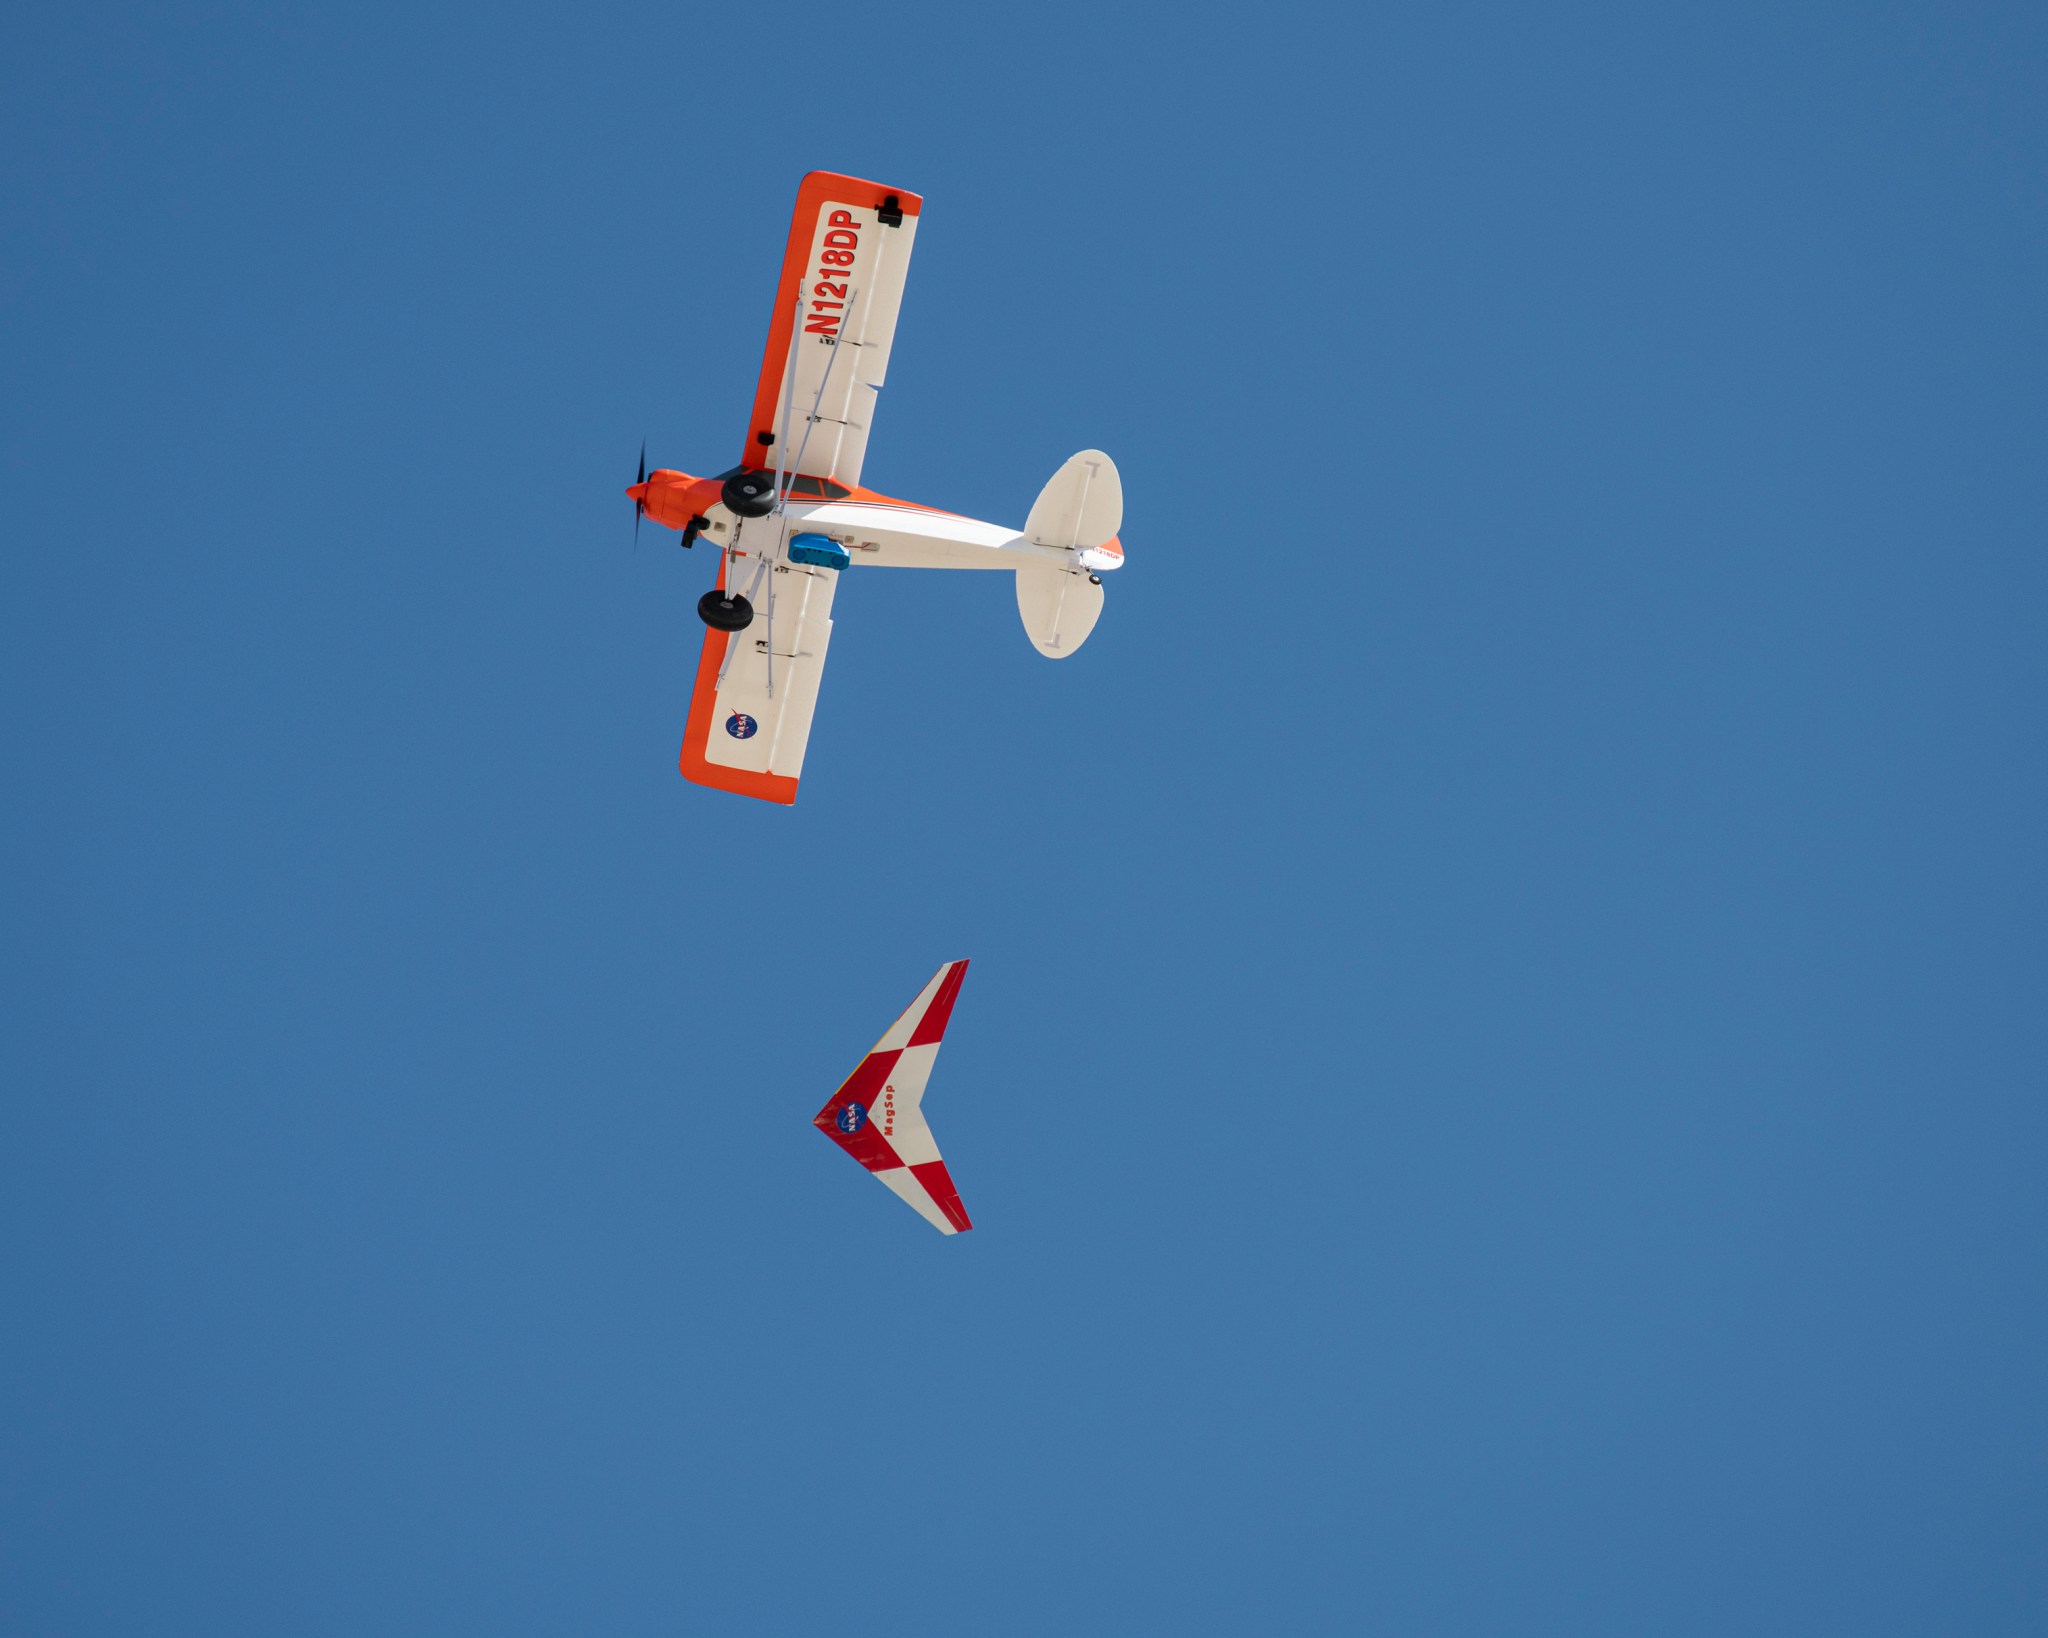 The Preliminary Research Aerodynamic Design to Land on Mars, or Prandtl-M, glider flies after a magnetic release mechanism on the Carbon-Z Cub was activated to air launch the aircraft.